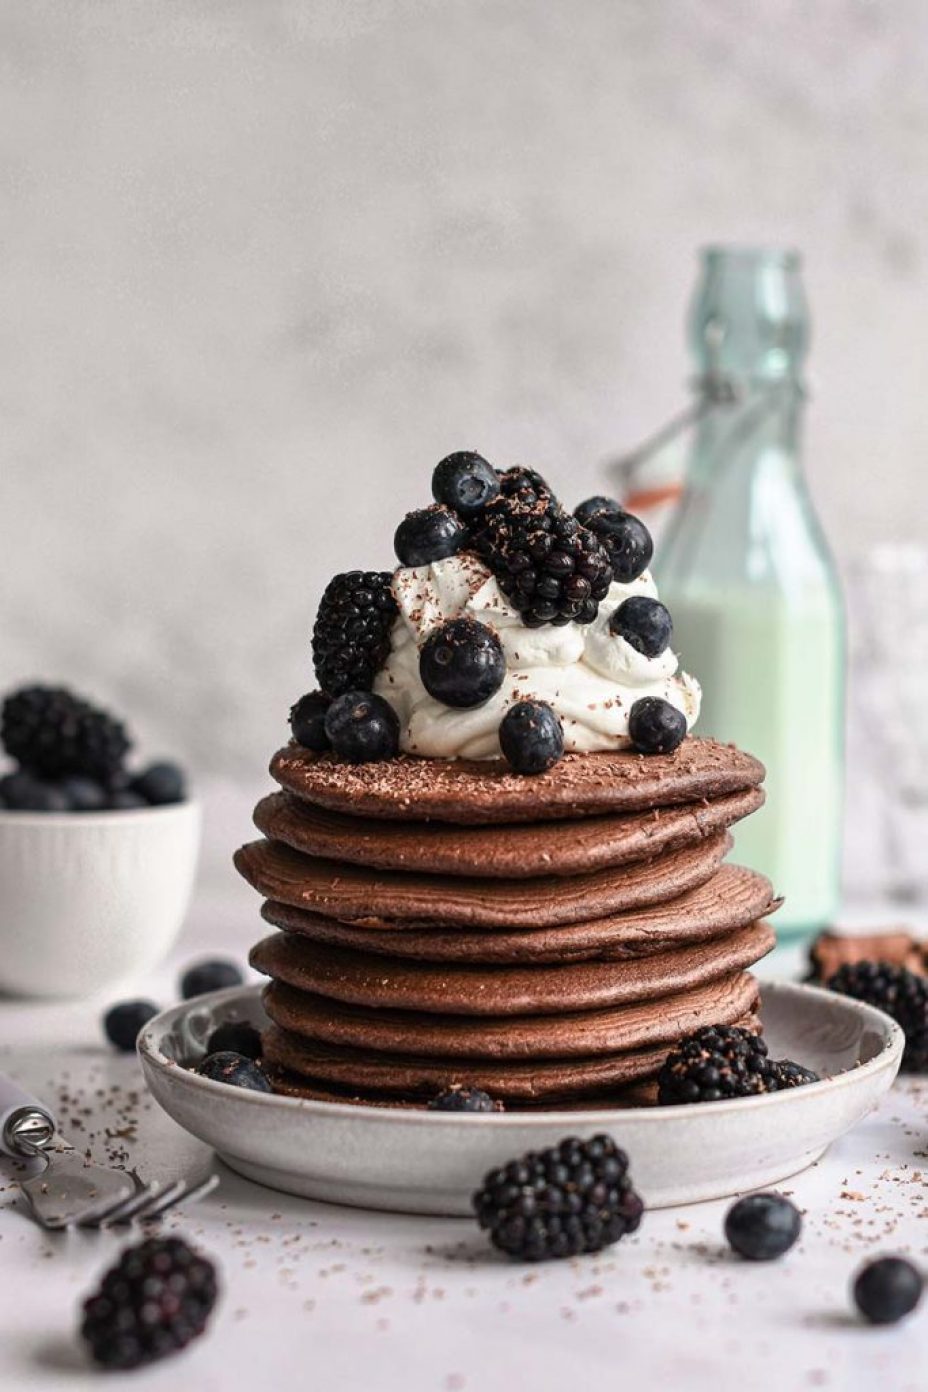 Chocolate pancakes; the perfect lazy day indulgent brunch